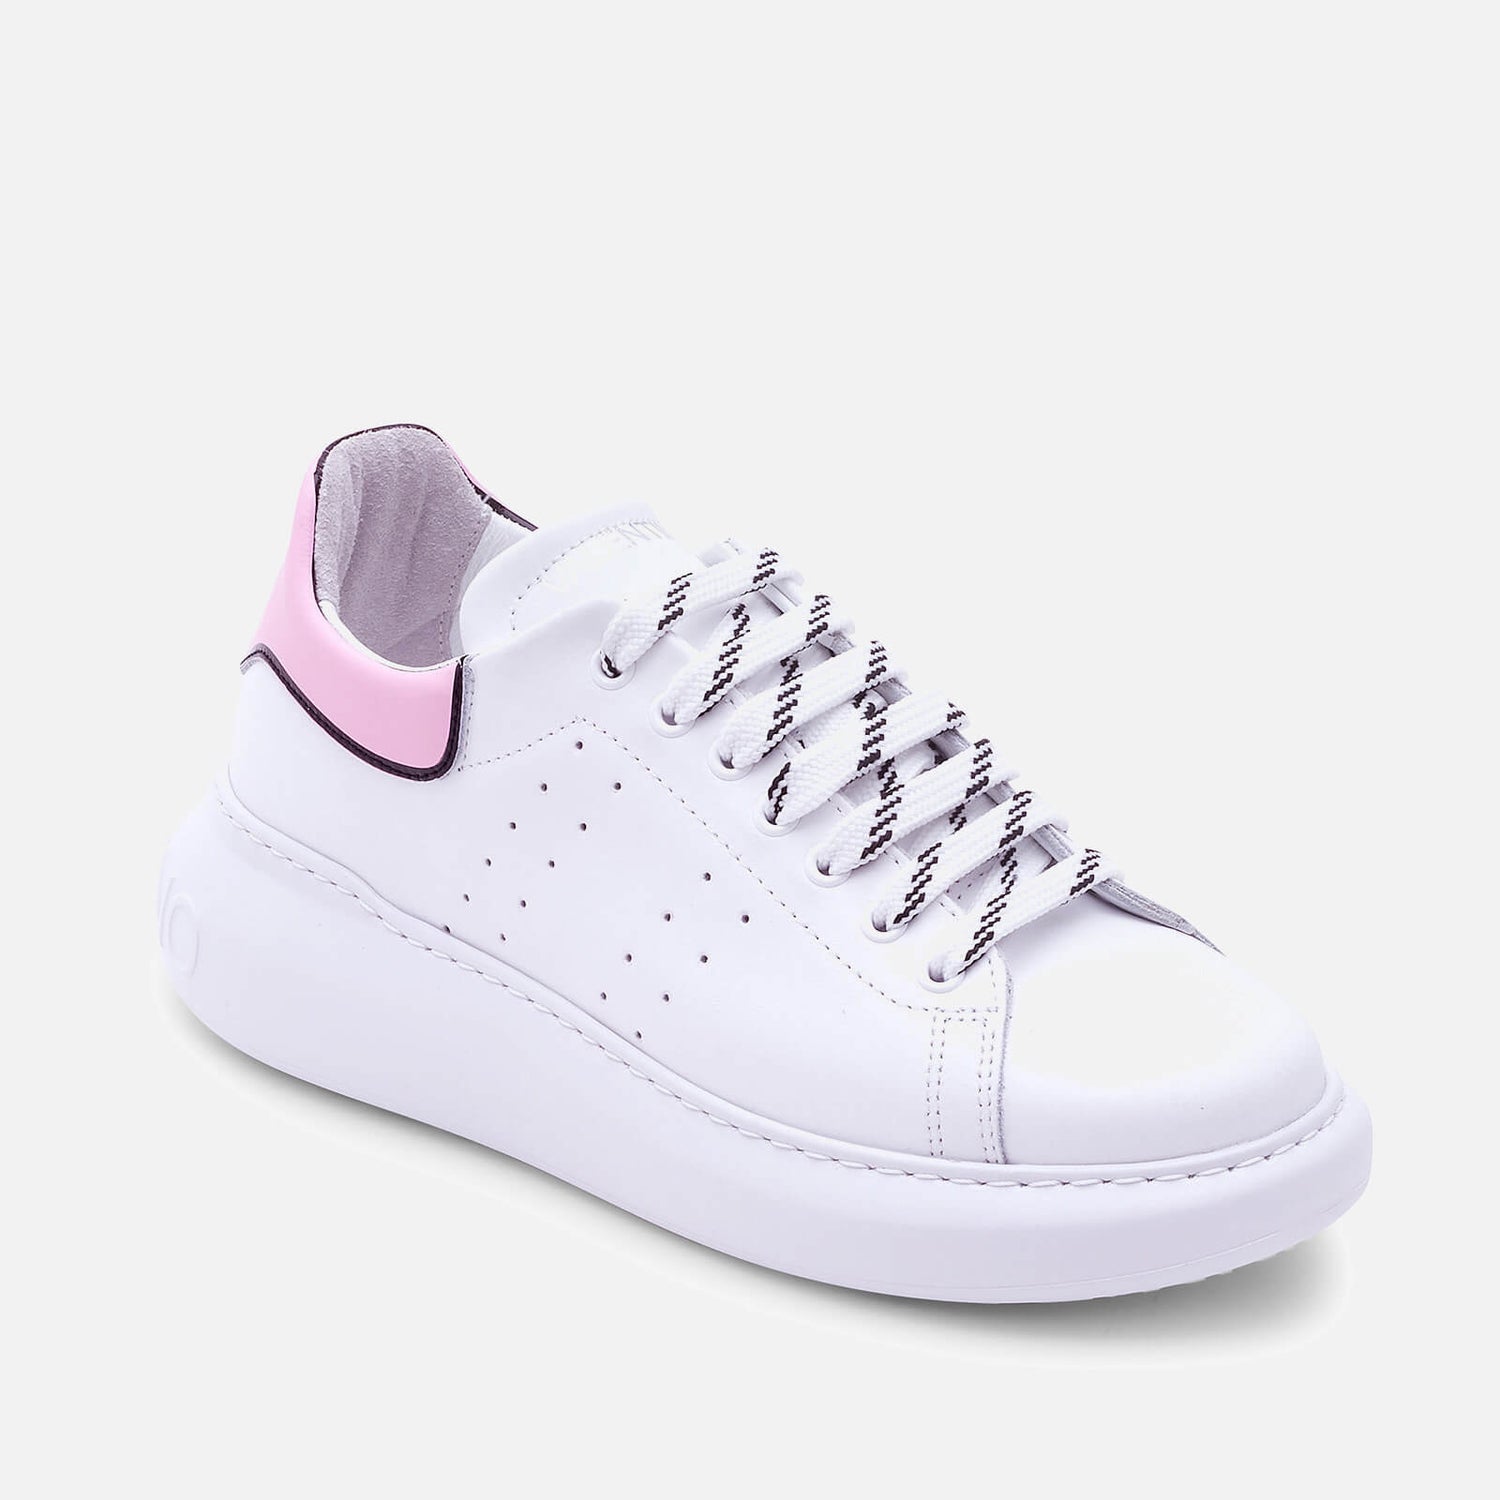 Valentino Shoes Women's Leather Chunky Trainers - White/Pink - UK 3